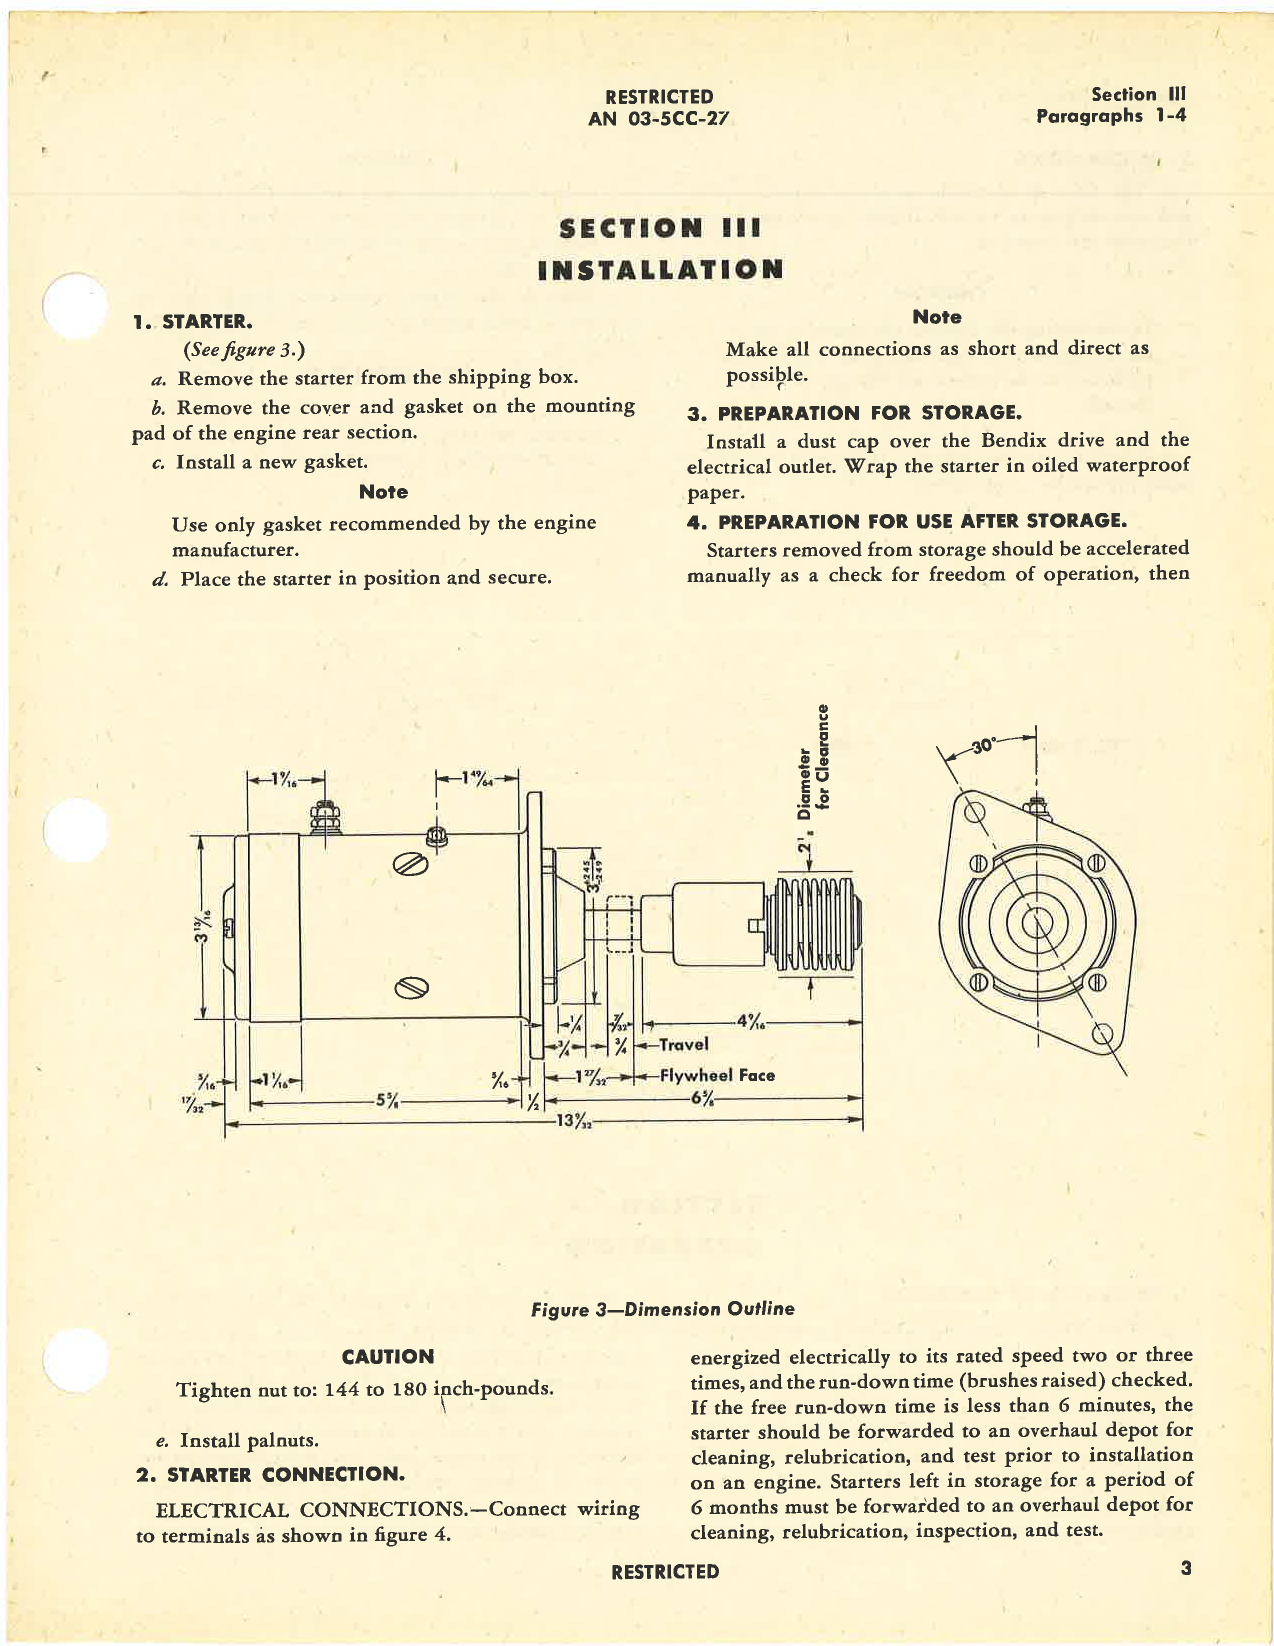 Sample page 7 from AirCorps Library document: Handbook of Instructions with Parts Catalog for Model 1109651 Starting Motor